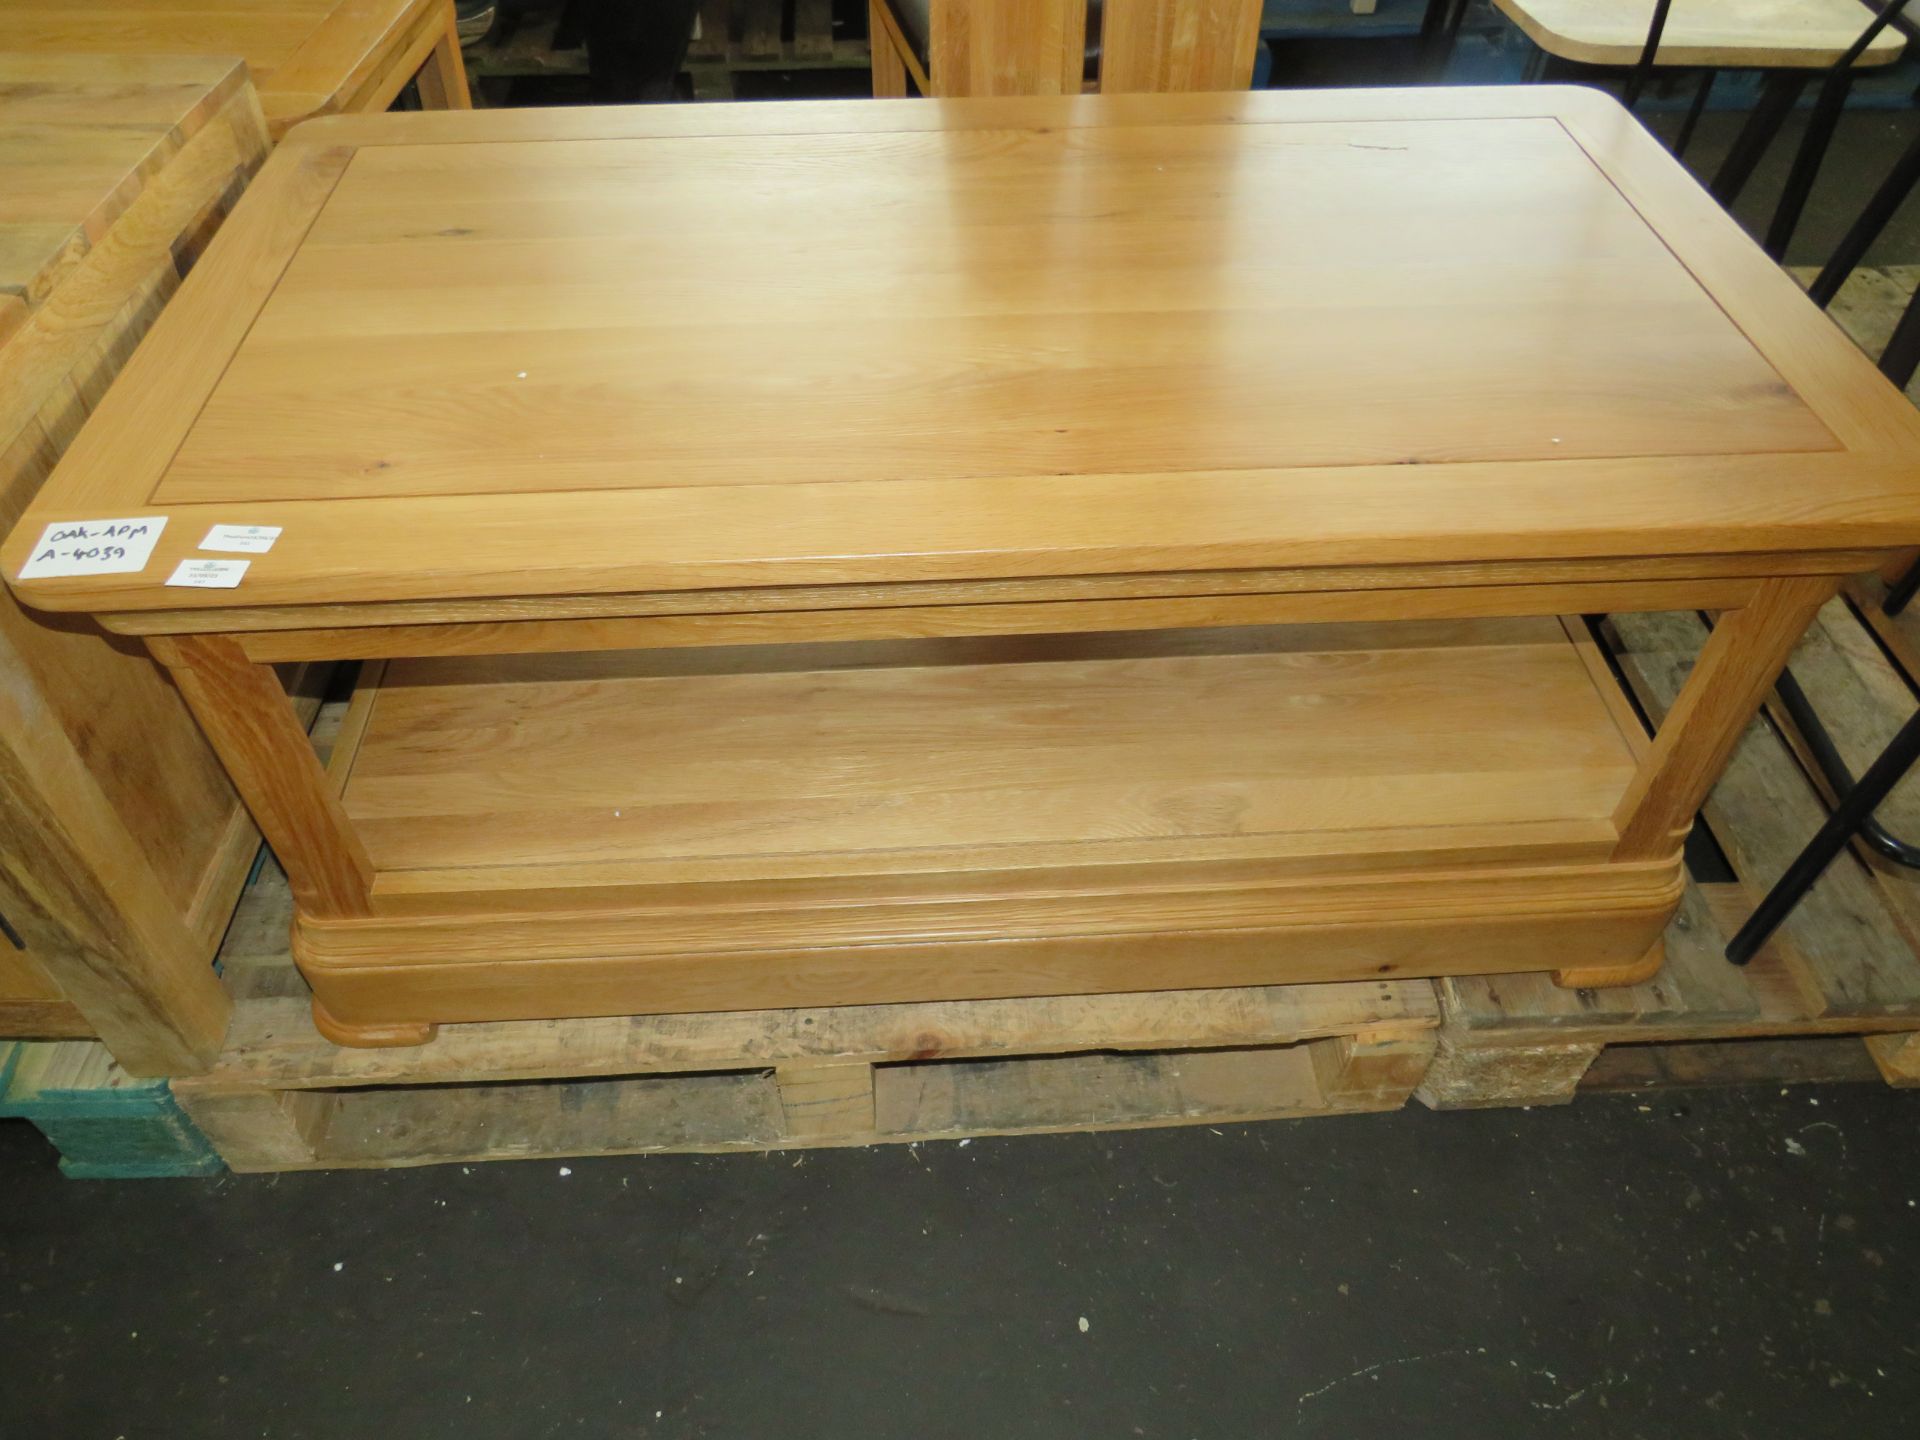 Oak Furnitureland Romsey Natural Solid Oak Coffee Table RRP 274.99 This item looks to be in good